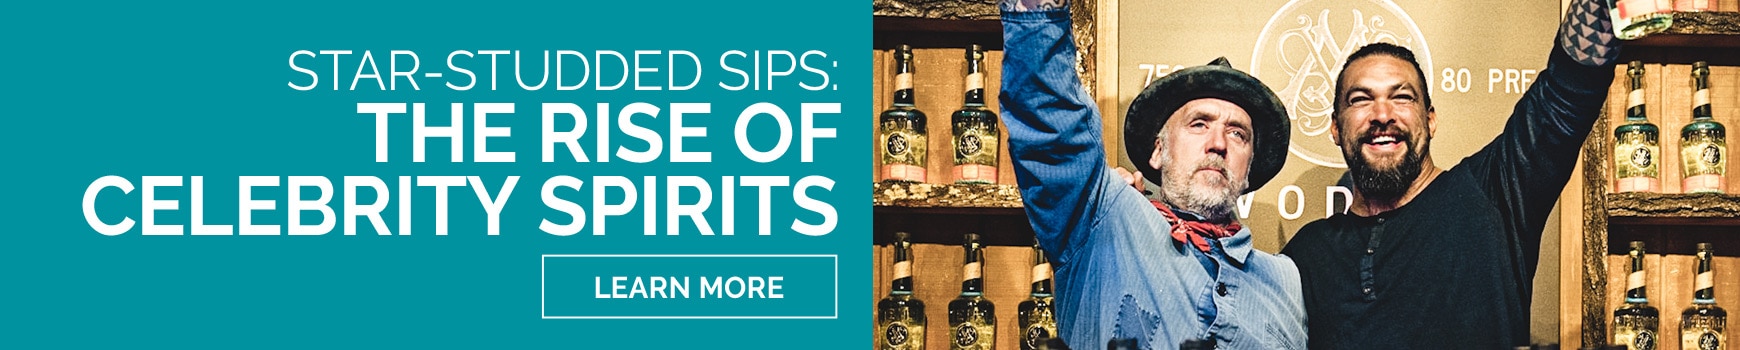 Star-Studded Sips: The Rise of Celebrity Spirits. Learn more.